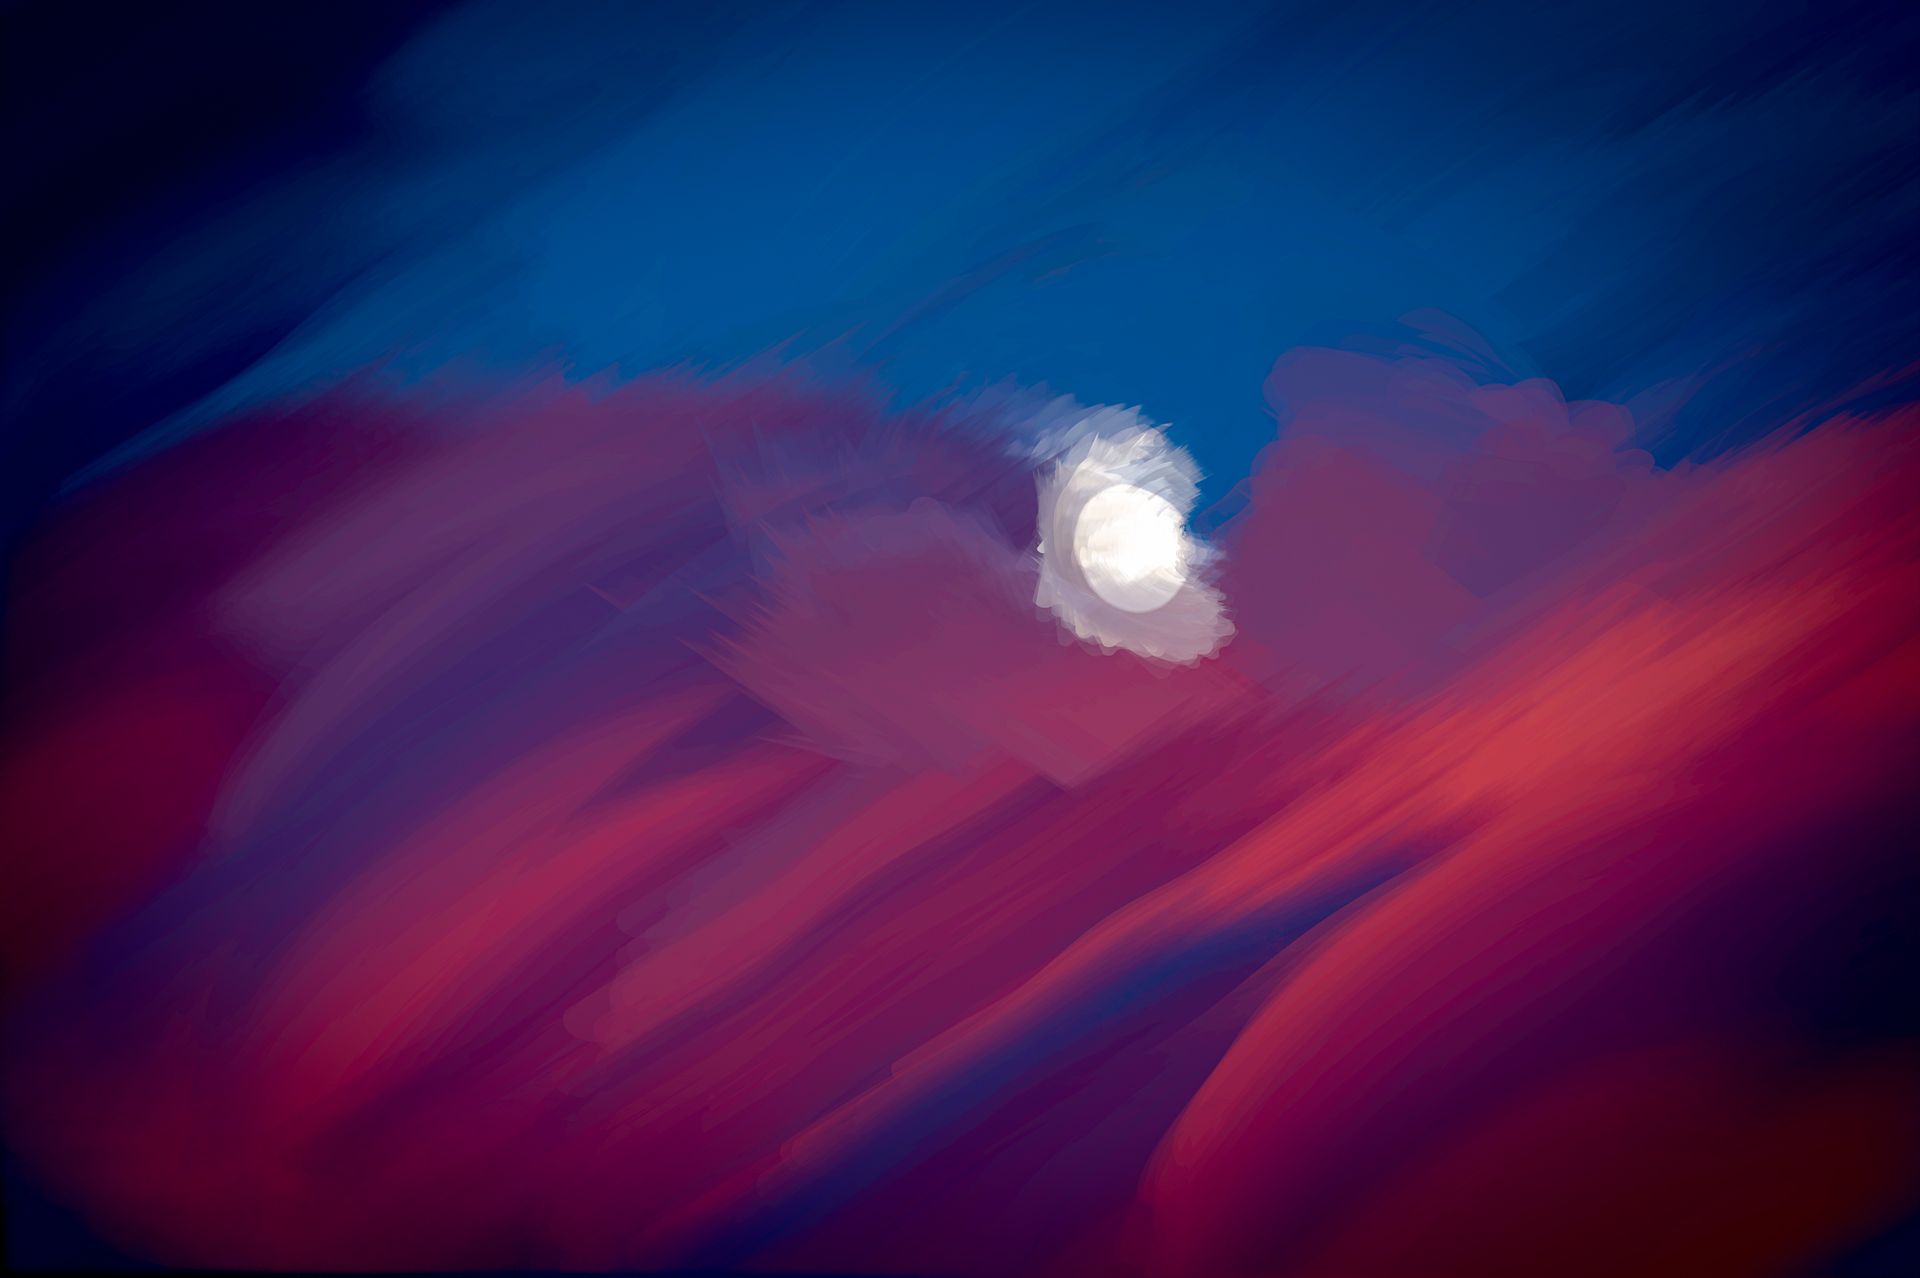 a photographic illustration of a full moon in a cloudy blue and pink sky